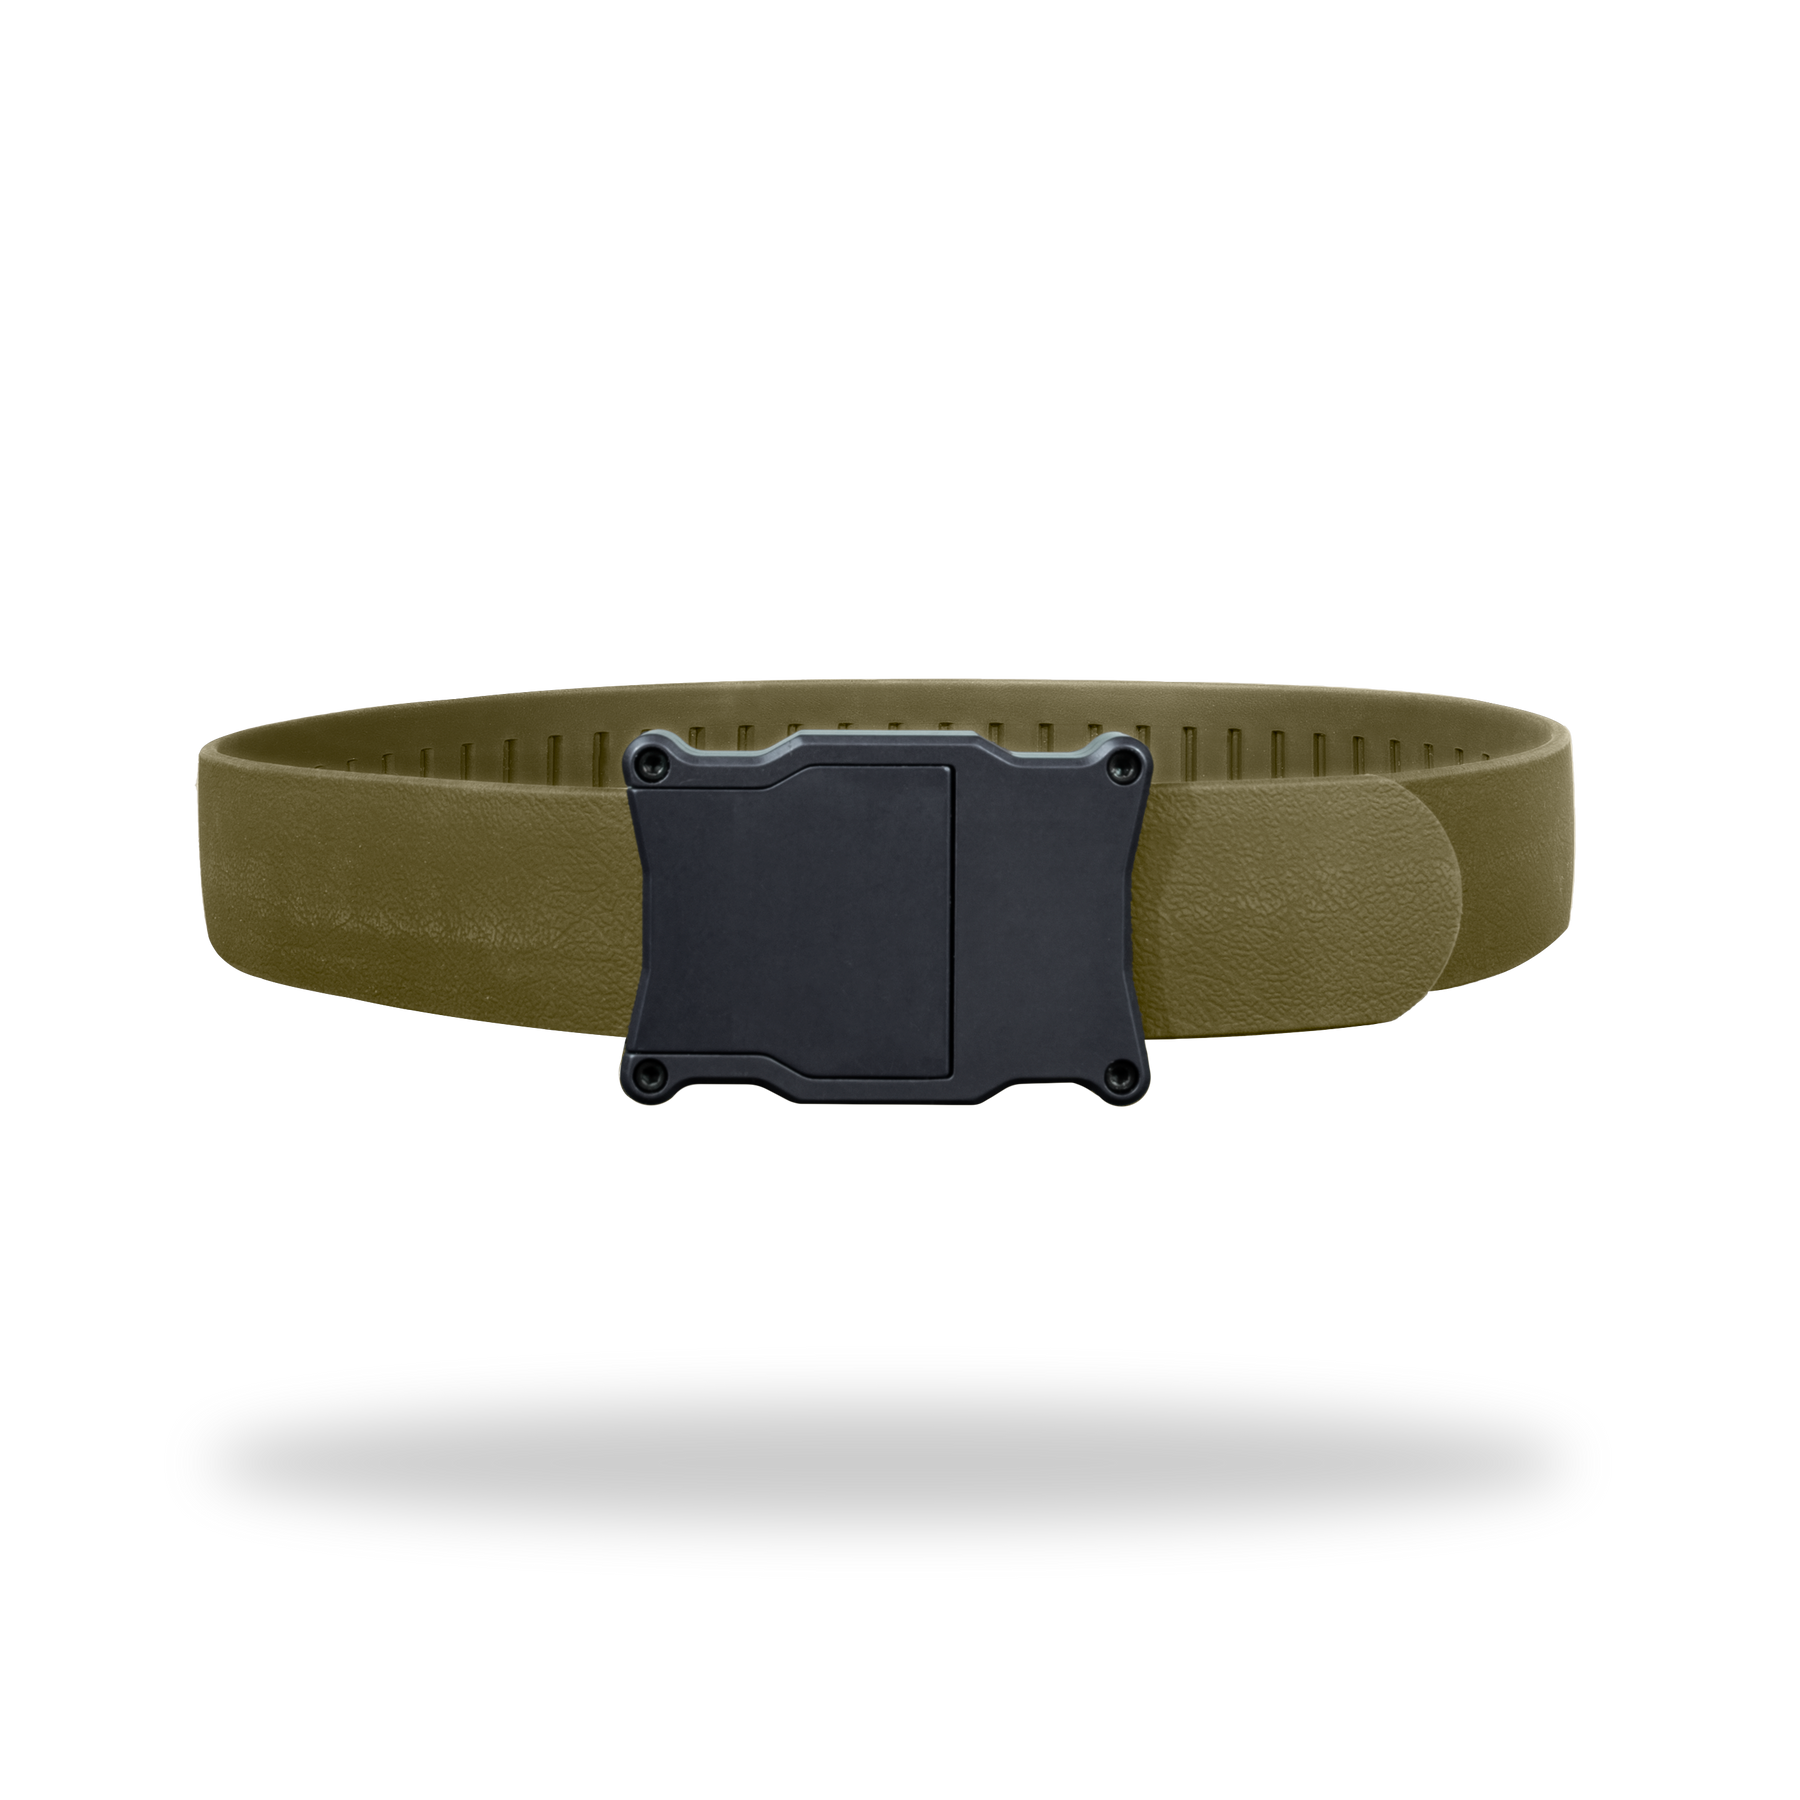 The Apogee Belt - Your Everyday Carry Belt